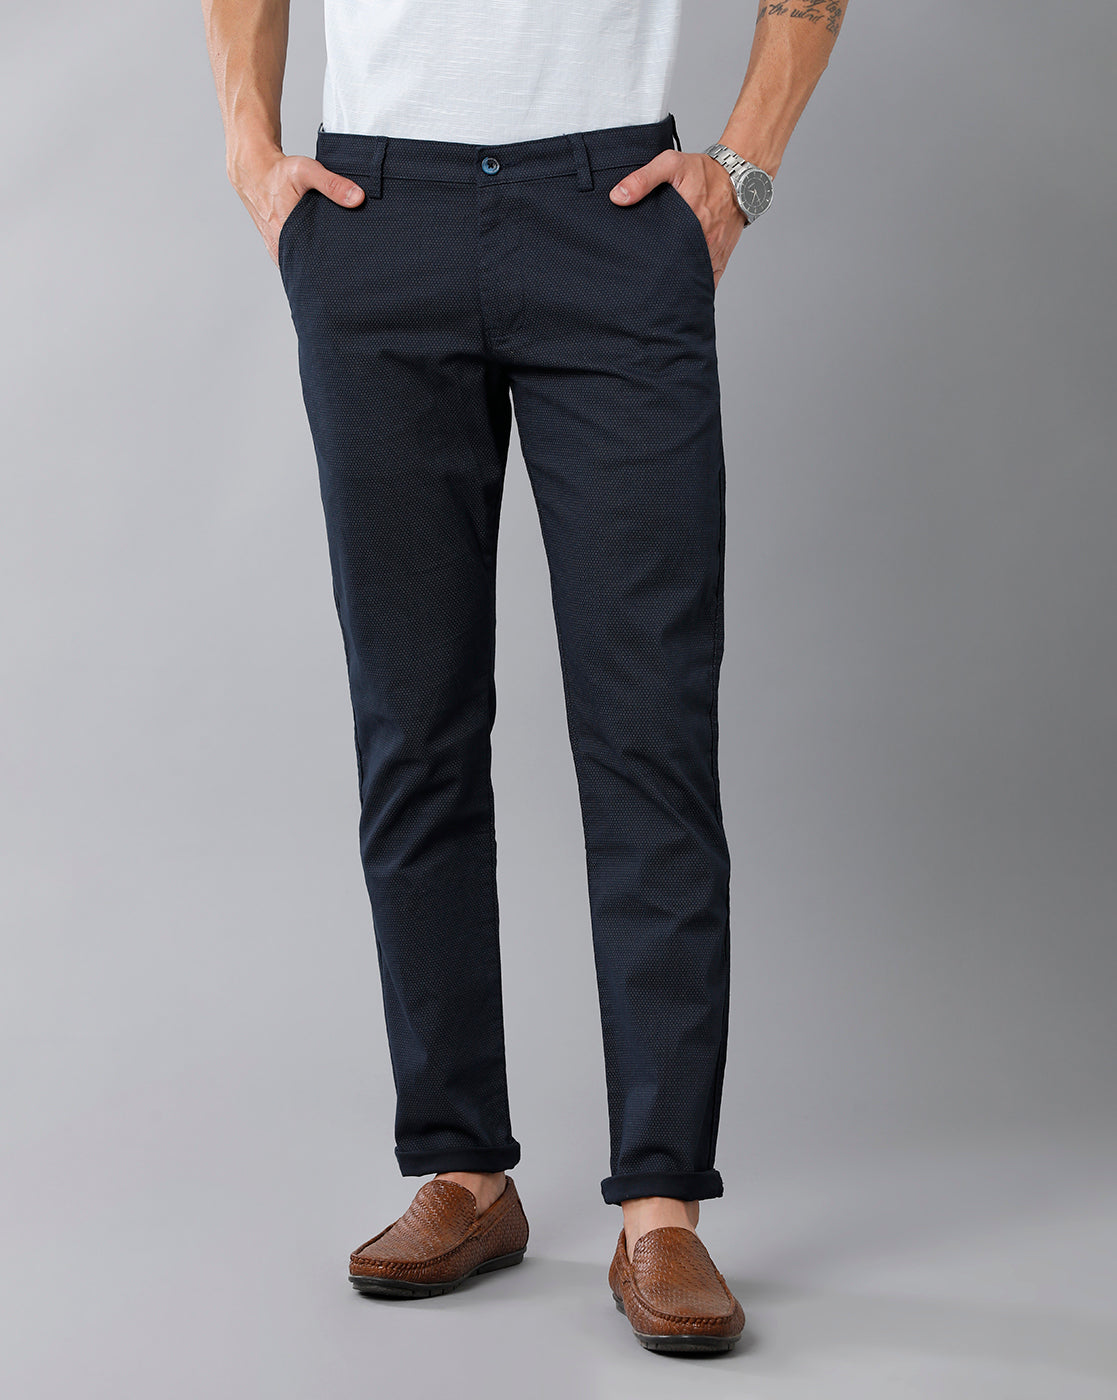 Classic Polo Men's 100% Cotton Moderate Fit Solid Navy Color Trouser | TO1-33 B-NVY